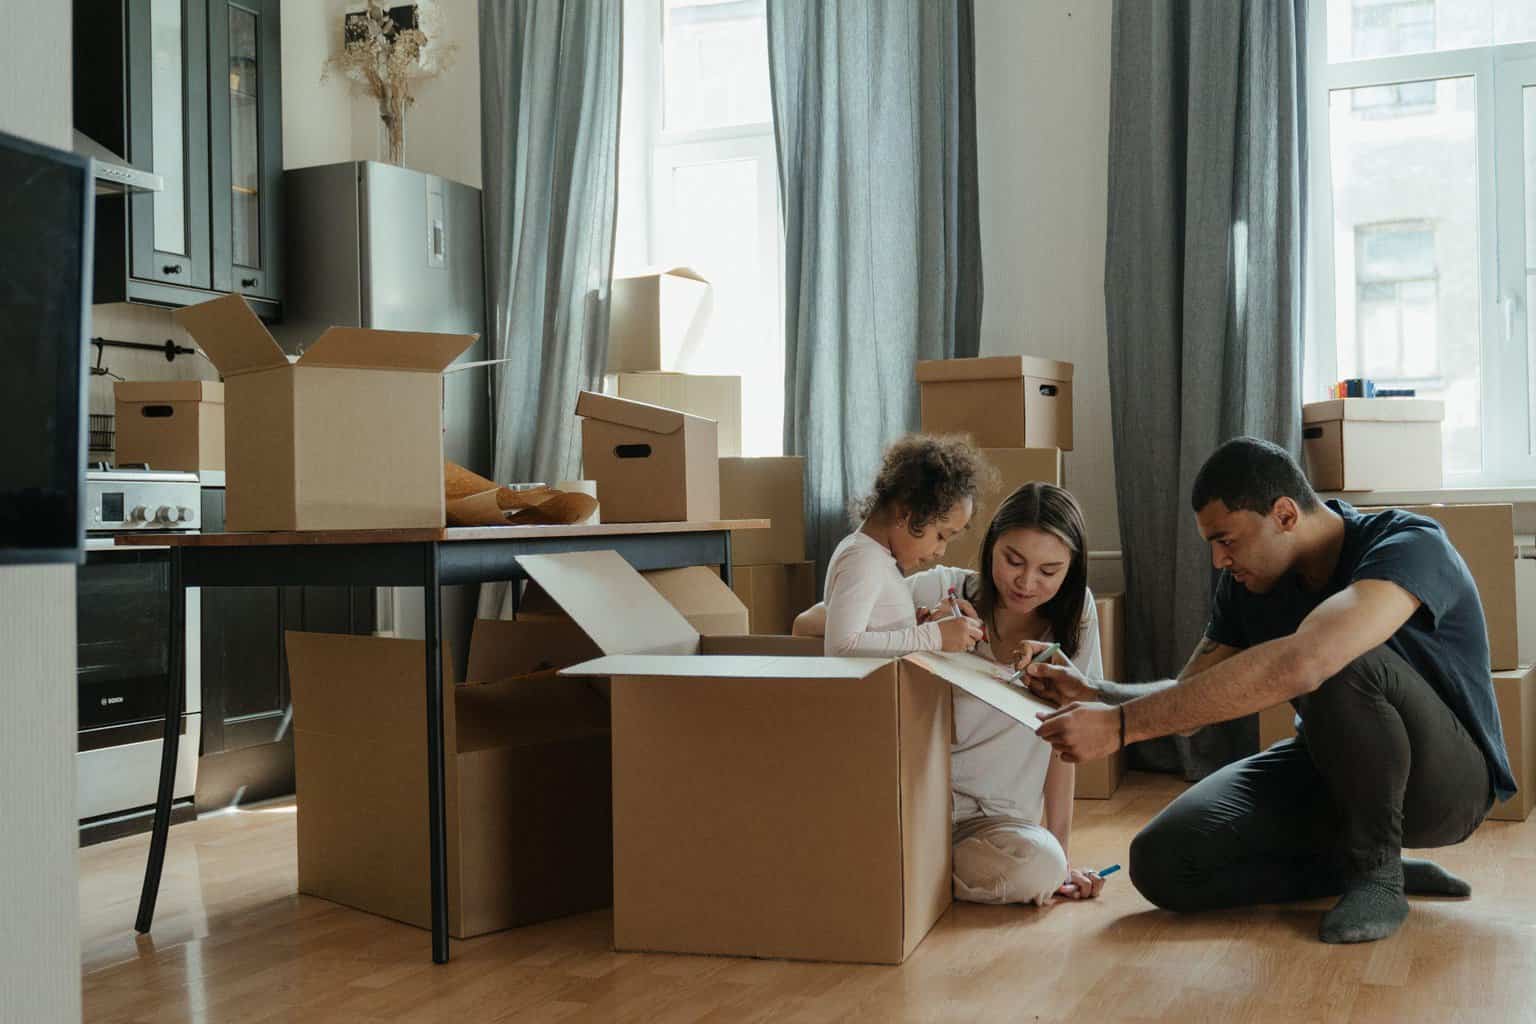 How to Make Moving With Kids a Good Experience